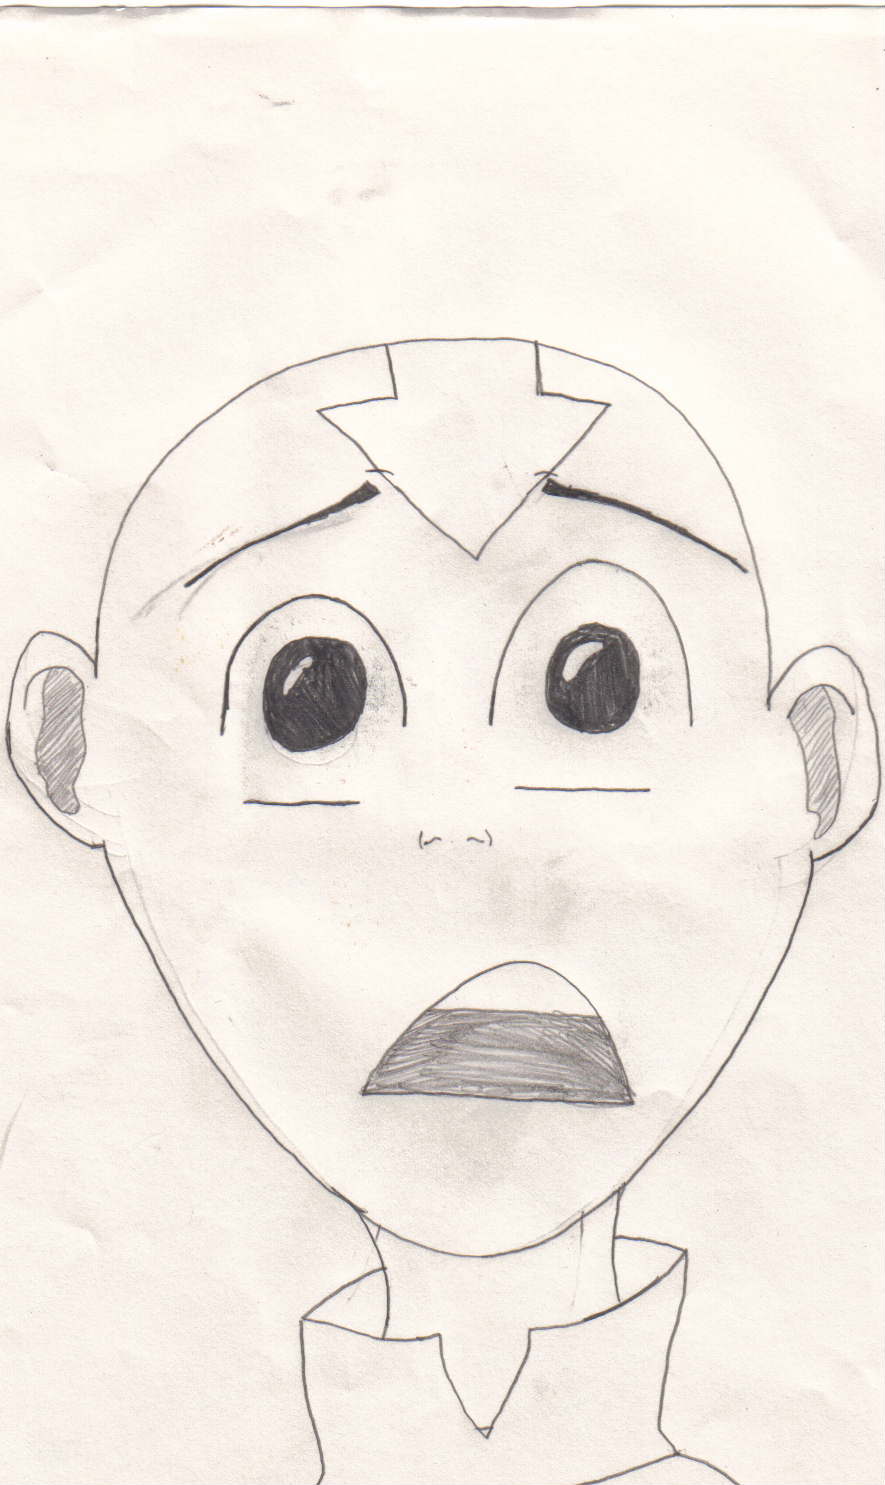 the 2nd pic of aang being not so happily suprised by ILoveAang